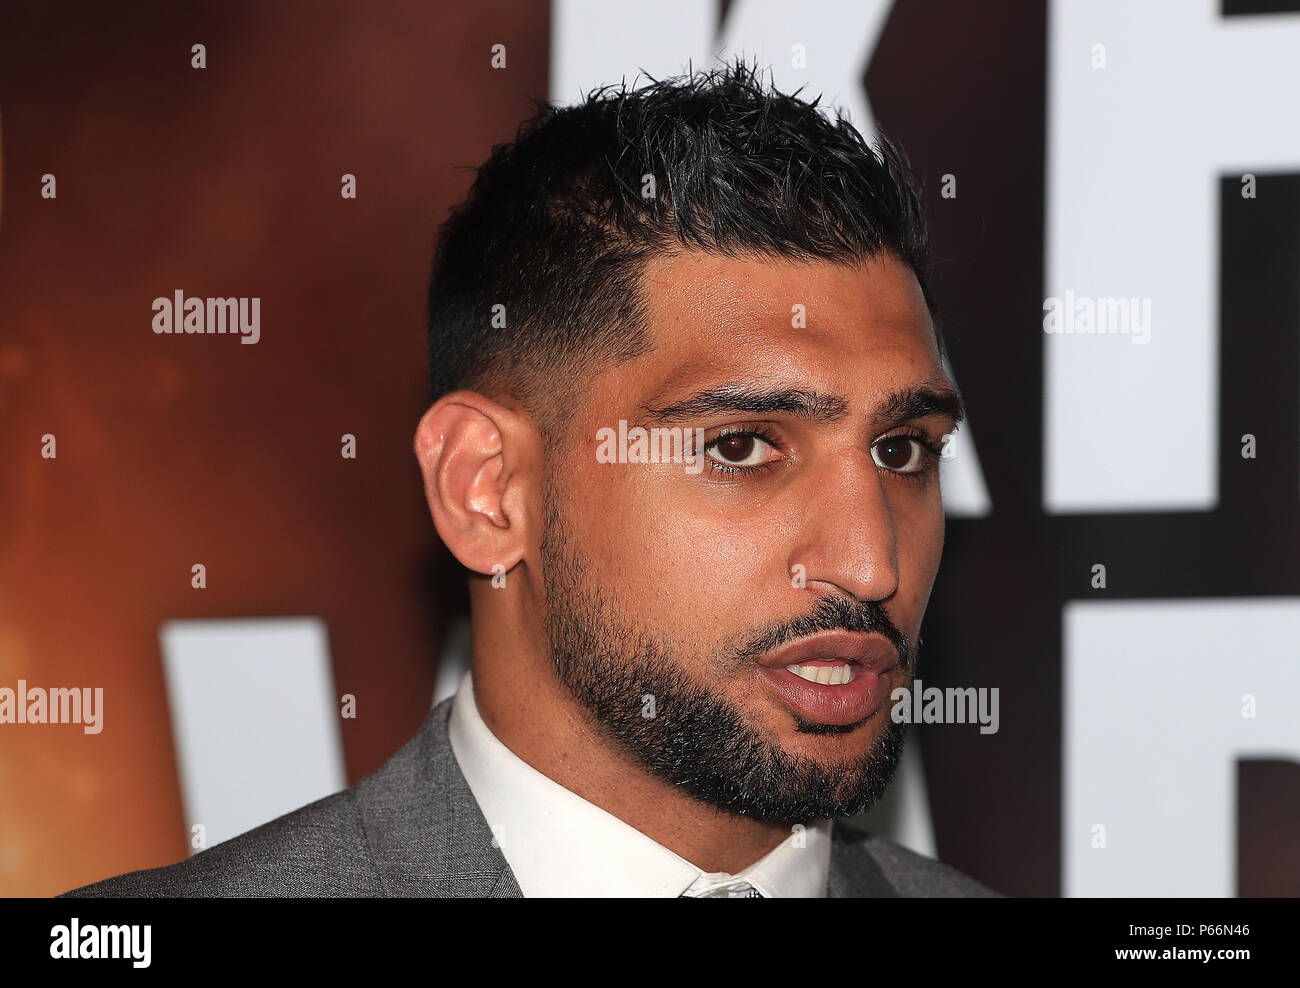 Amir Khan during the press conference at Arena Birmingham. PRESS ASSOCIATION Photo. Picture date: Thursday June 28, 2018. See PA story BOXING Khan. Photo credit should read: Simon Cooper/PA Wire Stock Photo